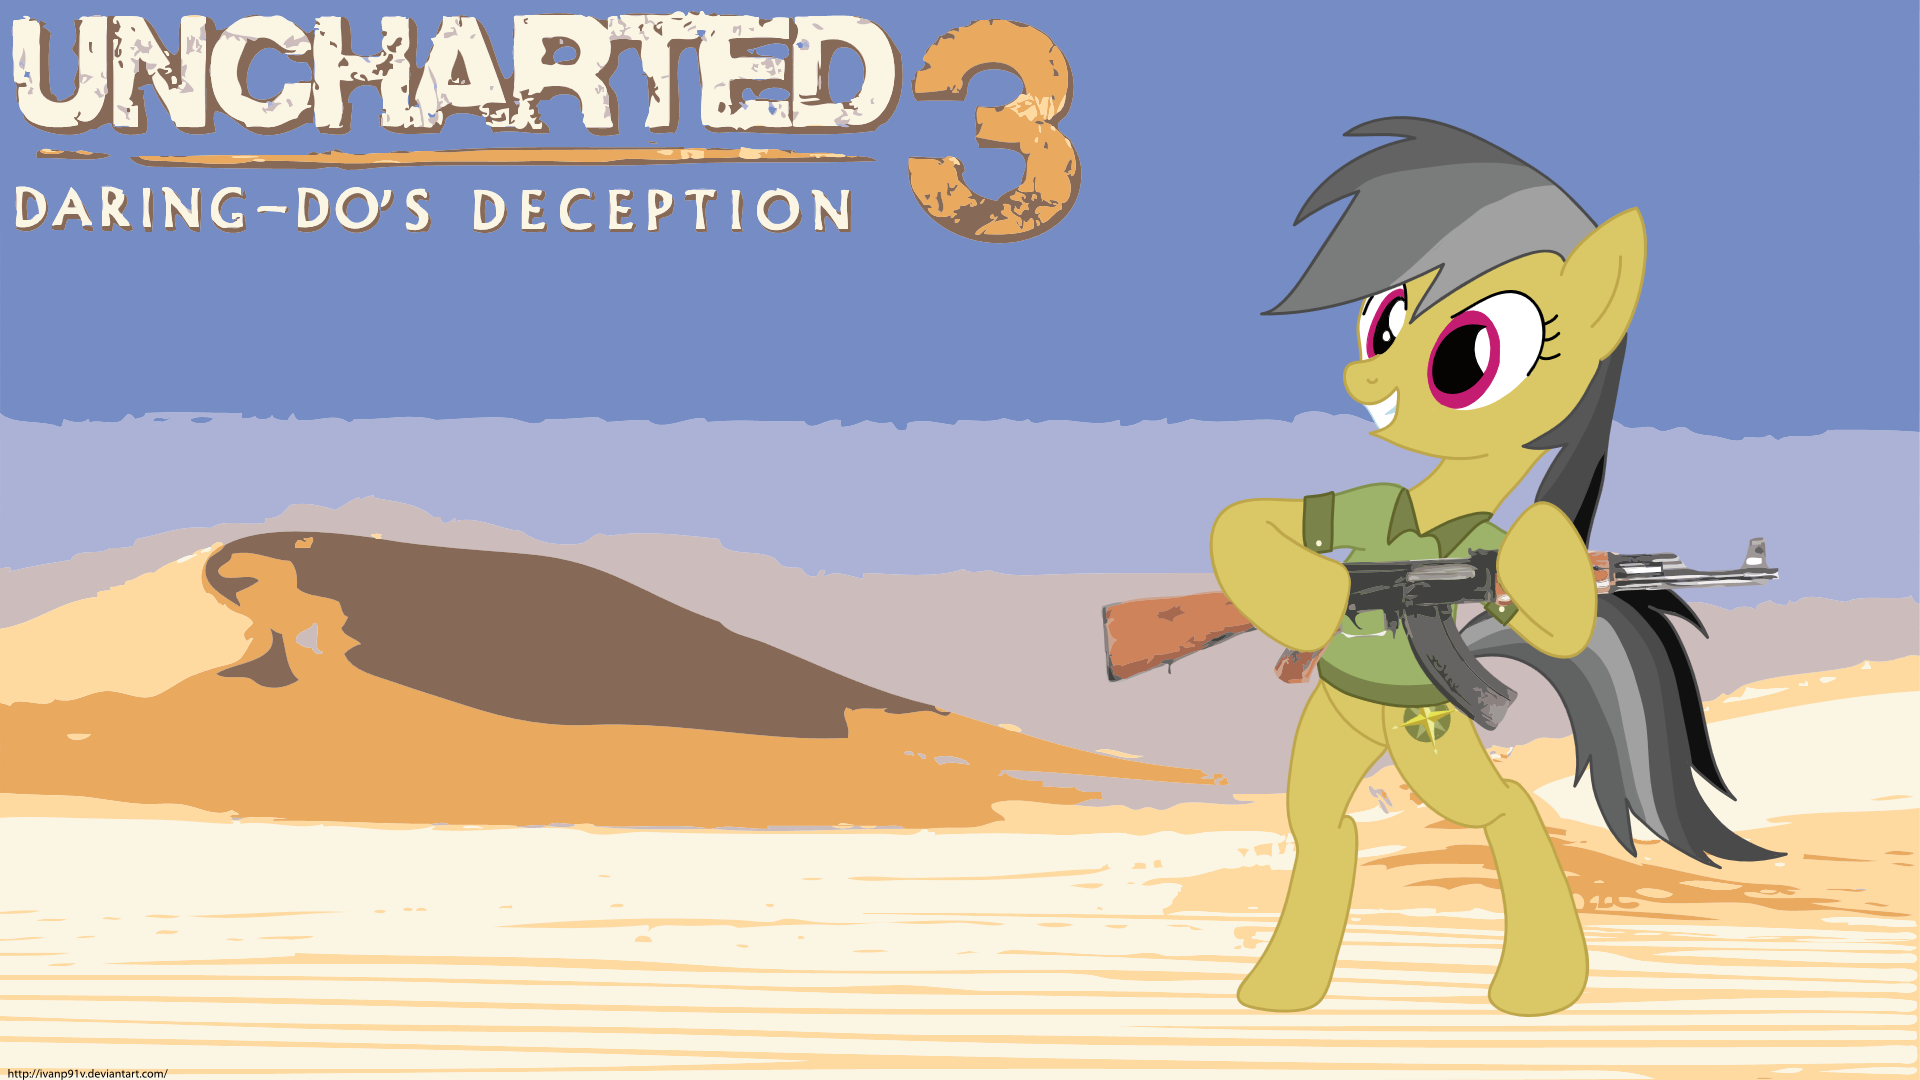 Uncharted 3: Daring-Do's deception by IvanP91v